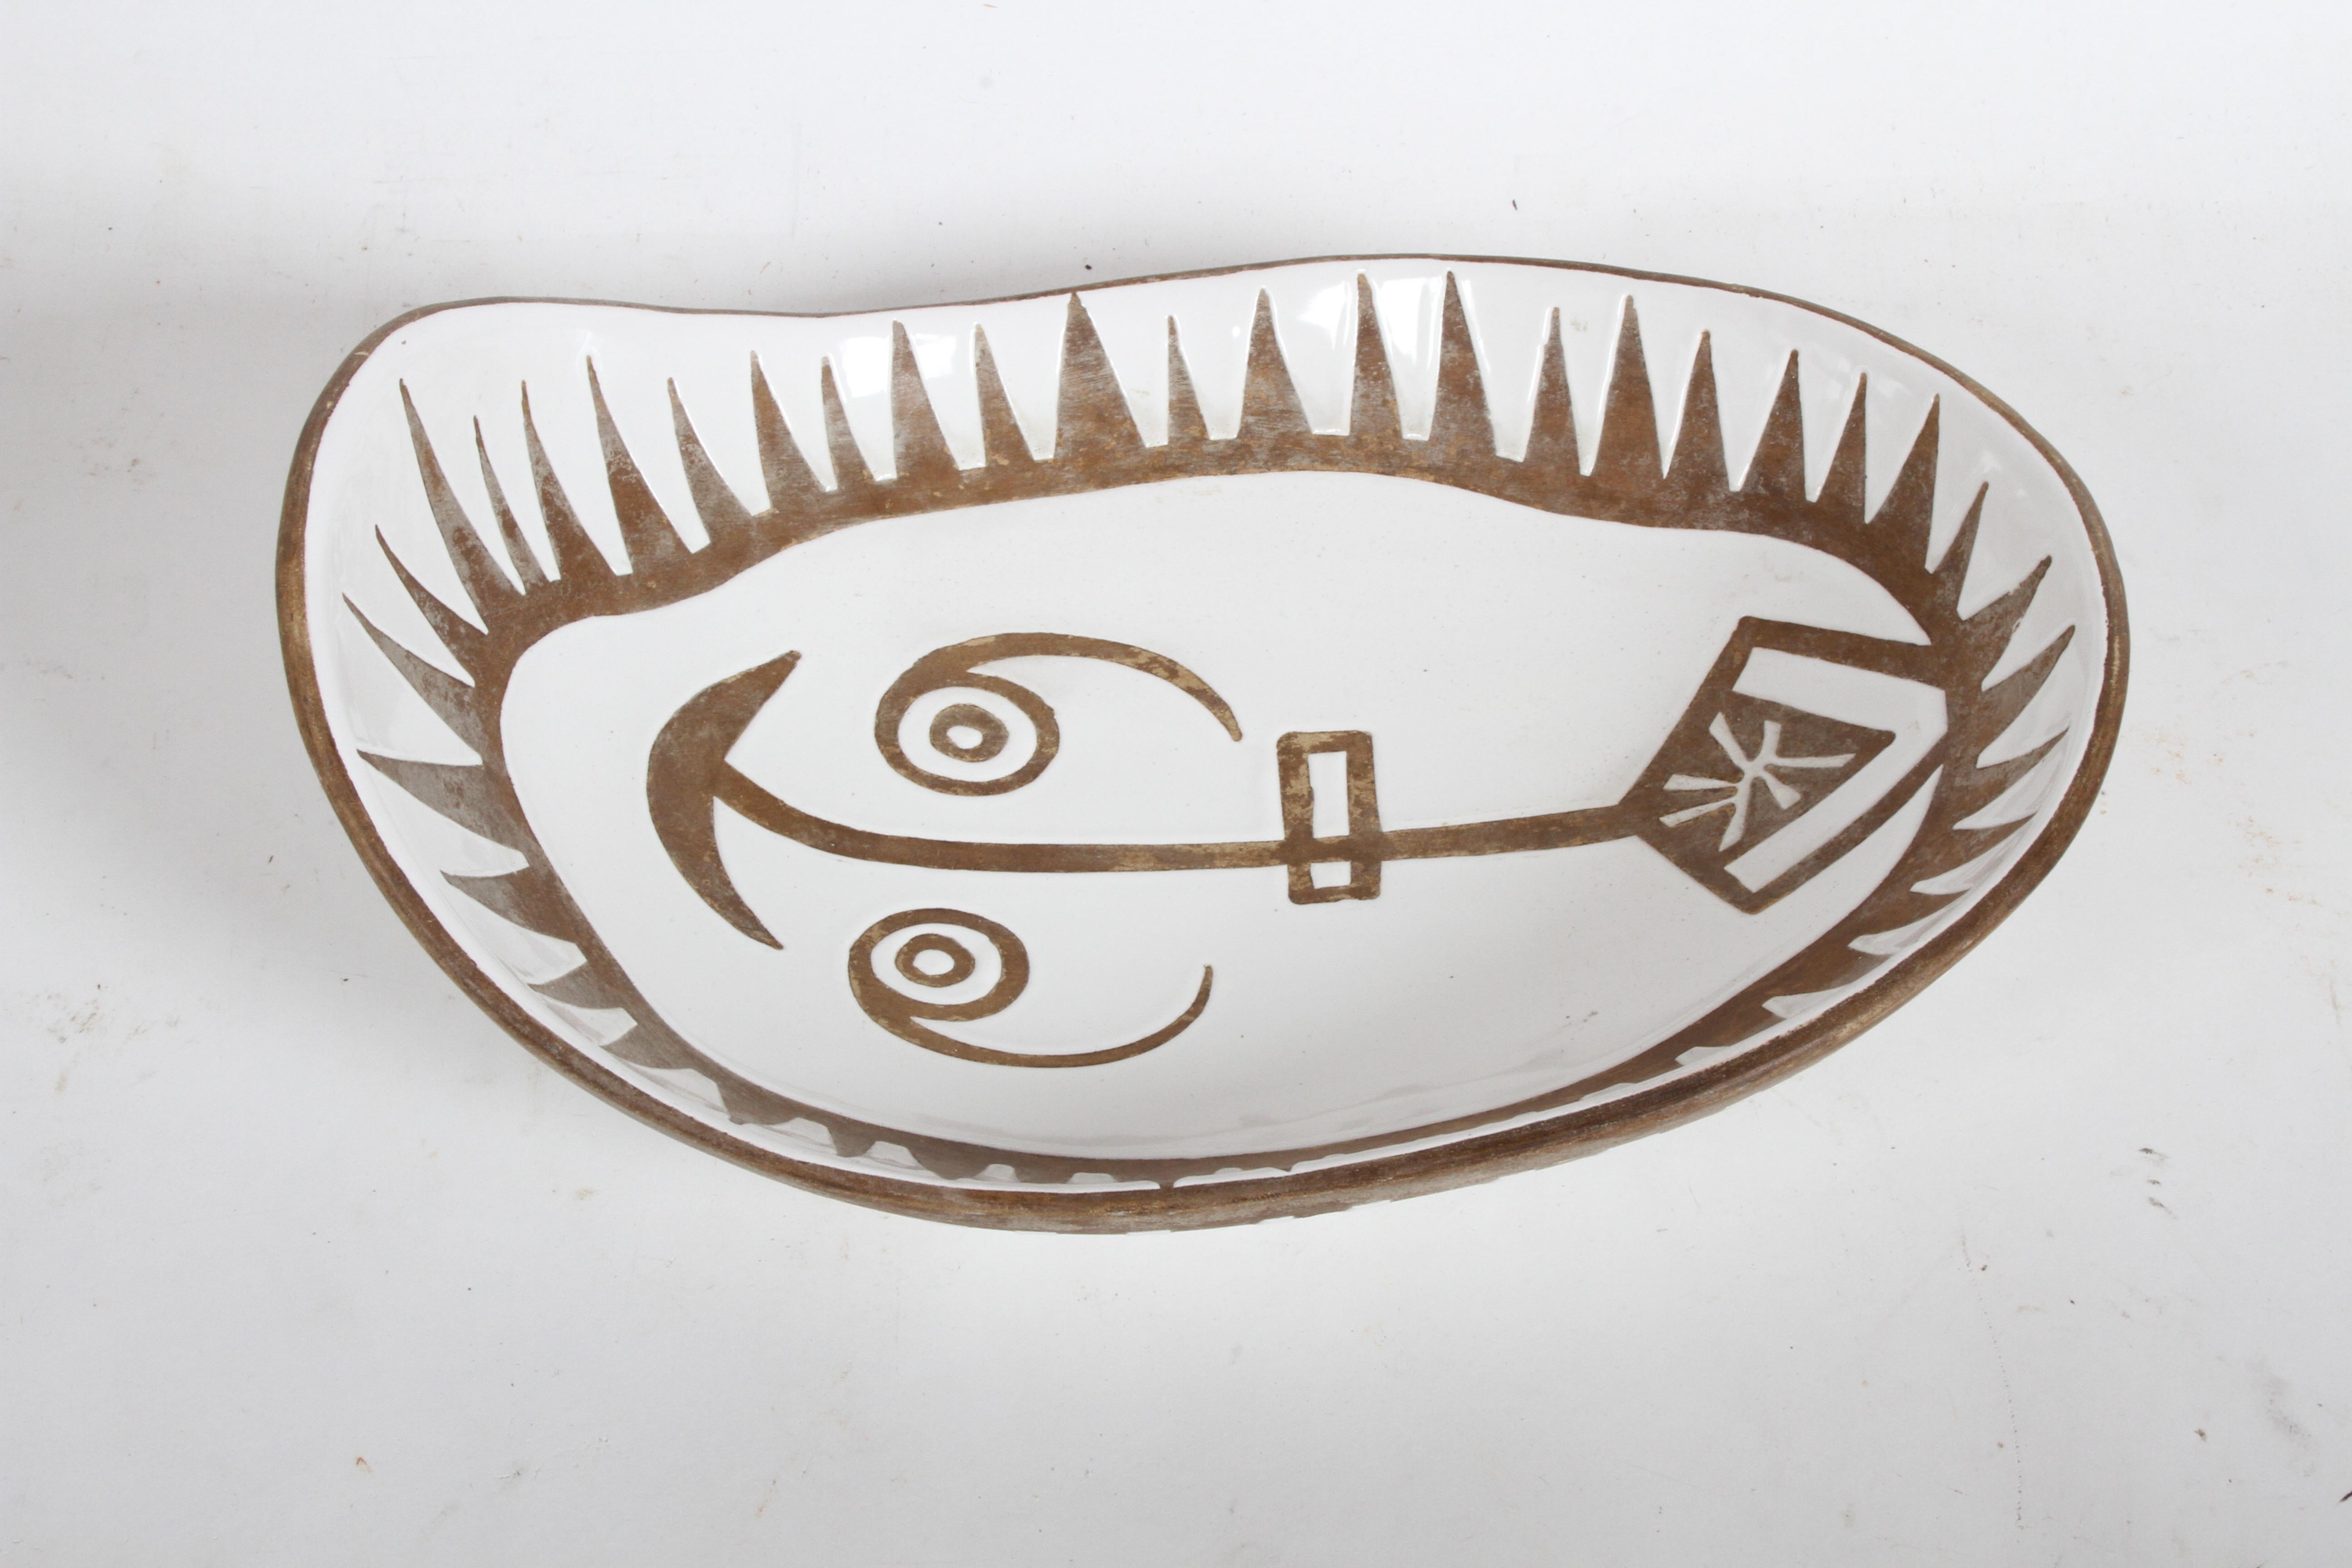 Unique Mid-Century Modern Urbano Zaccagnini white and brown signed ceramic bowl with intaglio relief of African abstract mask in the style of Pablo Picasso ceramics. Urbano opened his own studio in Florence, Italy in 1958, the eldest son of famous